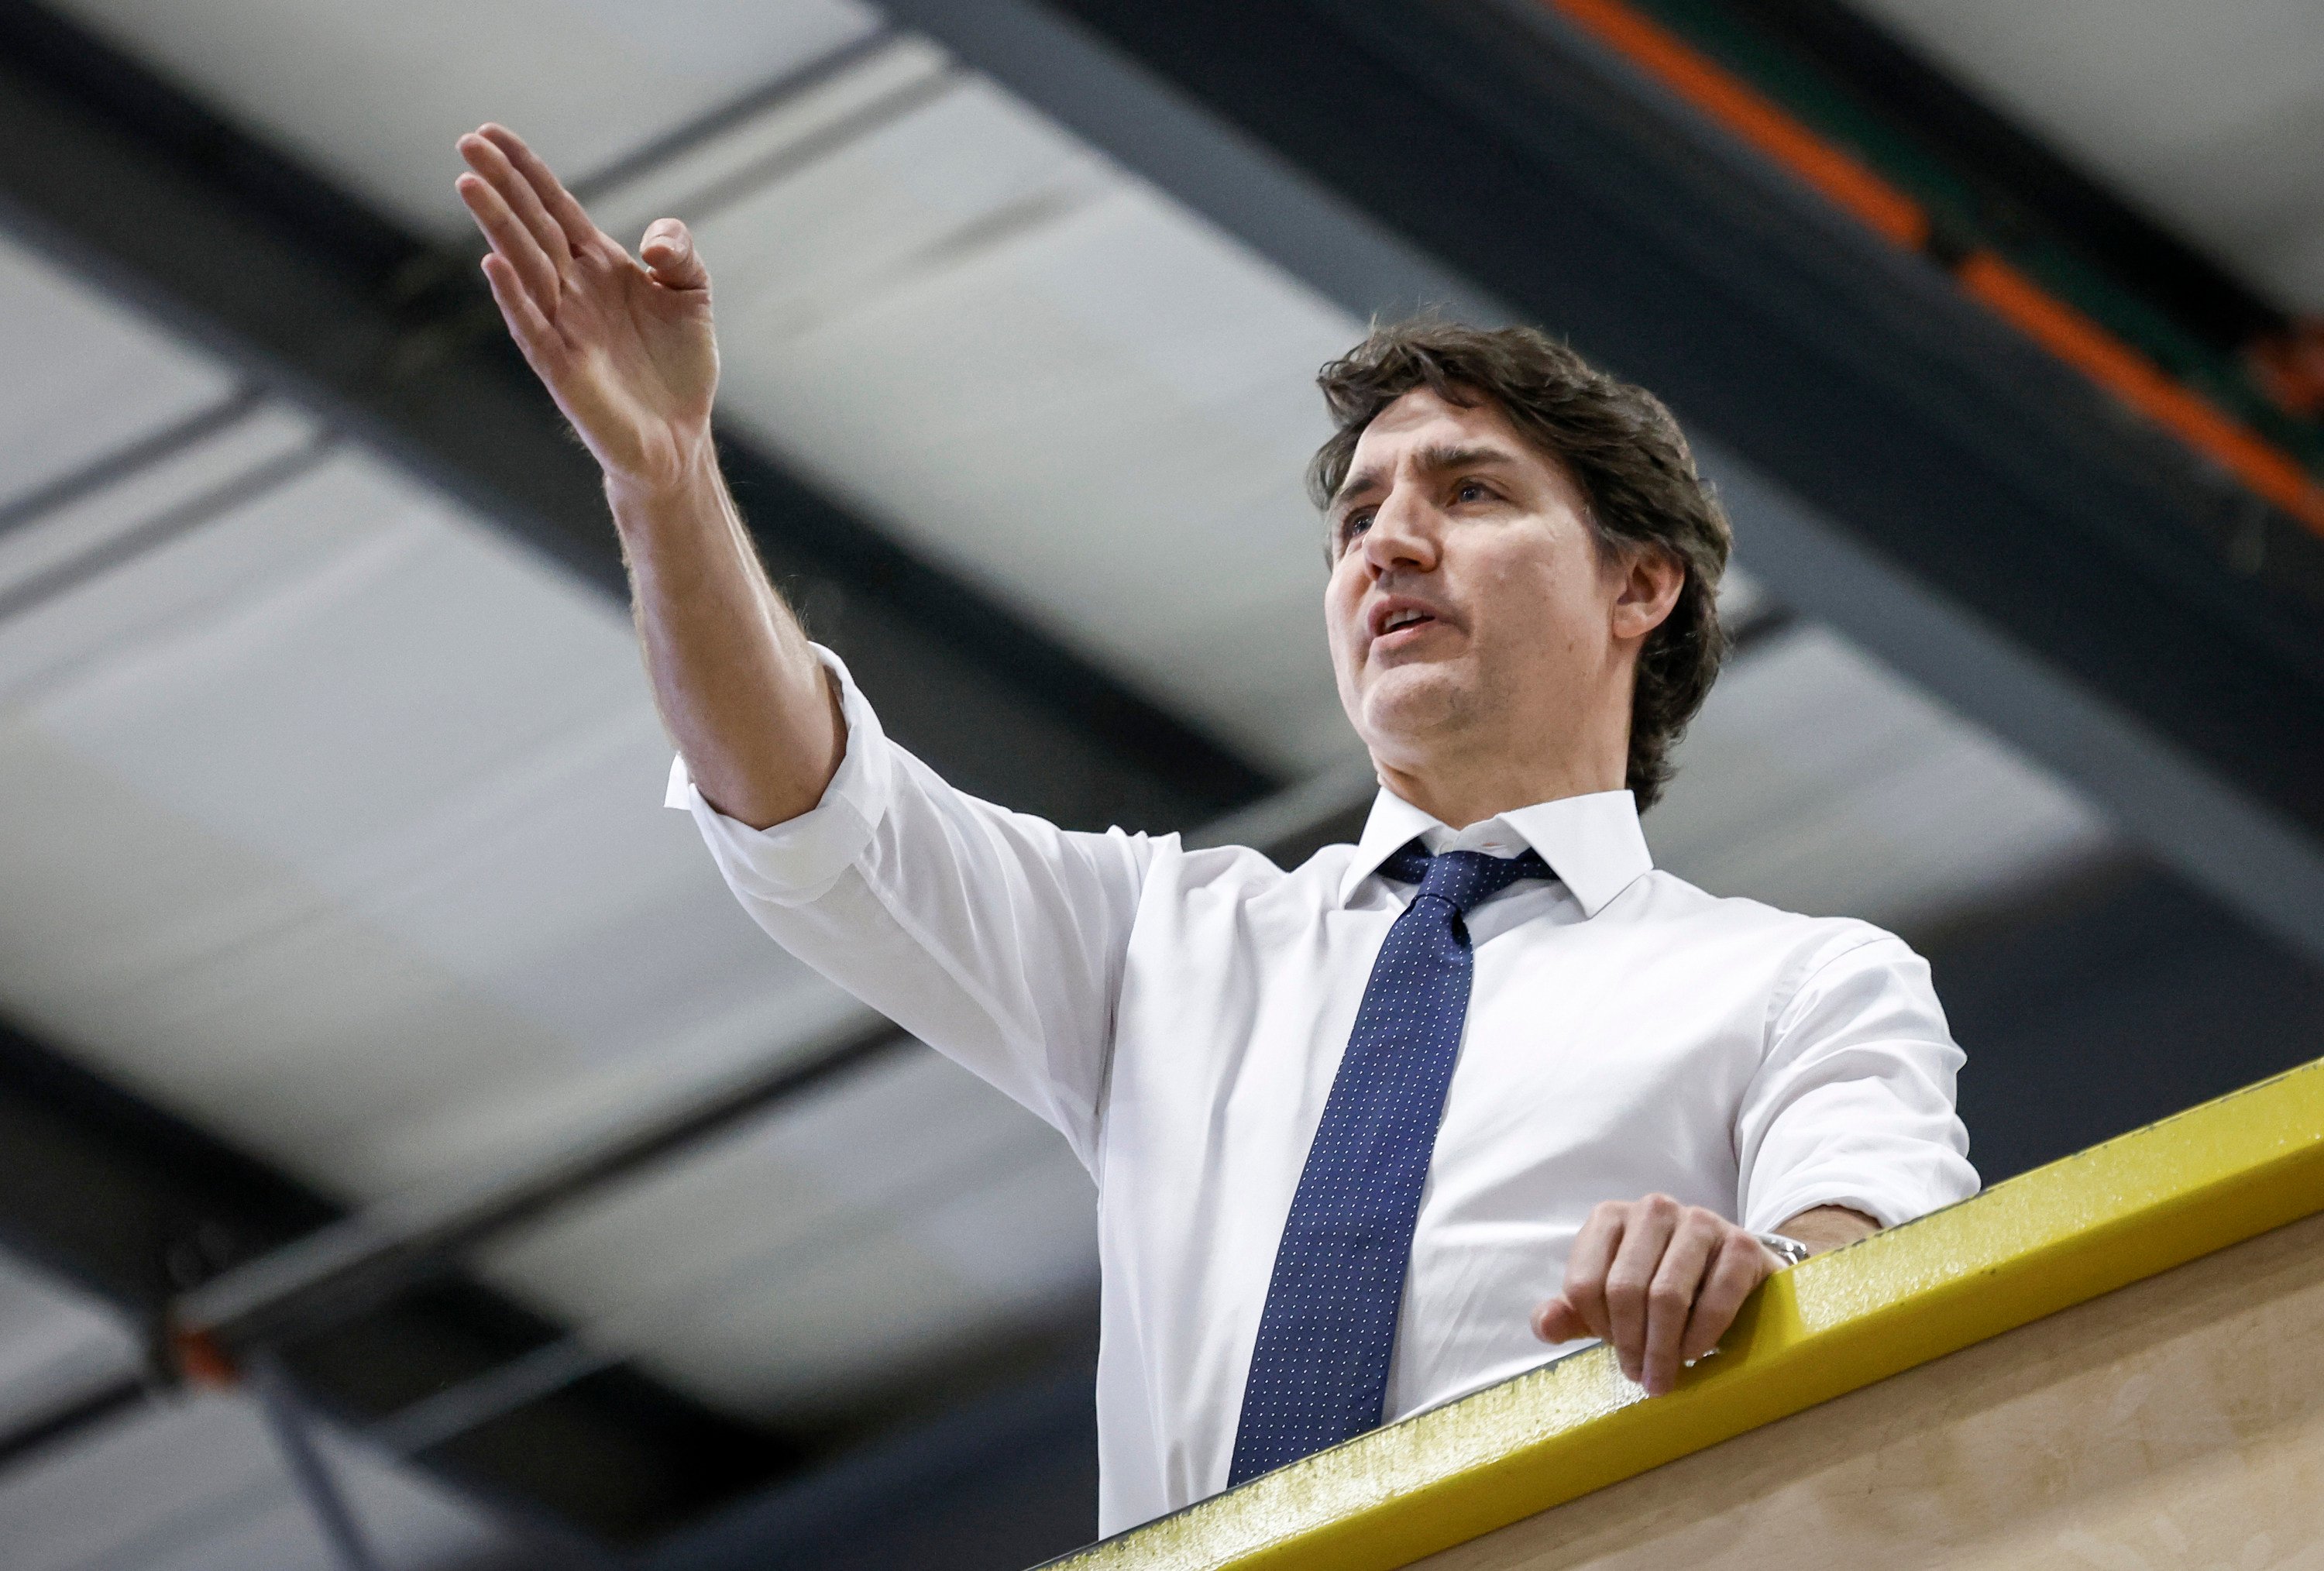 Canadian Prime Minister Justin Trudeau tours a modular home construction facility before making a housing announcement in Calgary, Alberta, on Friday. Photo: Canadian Press via AP